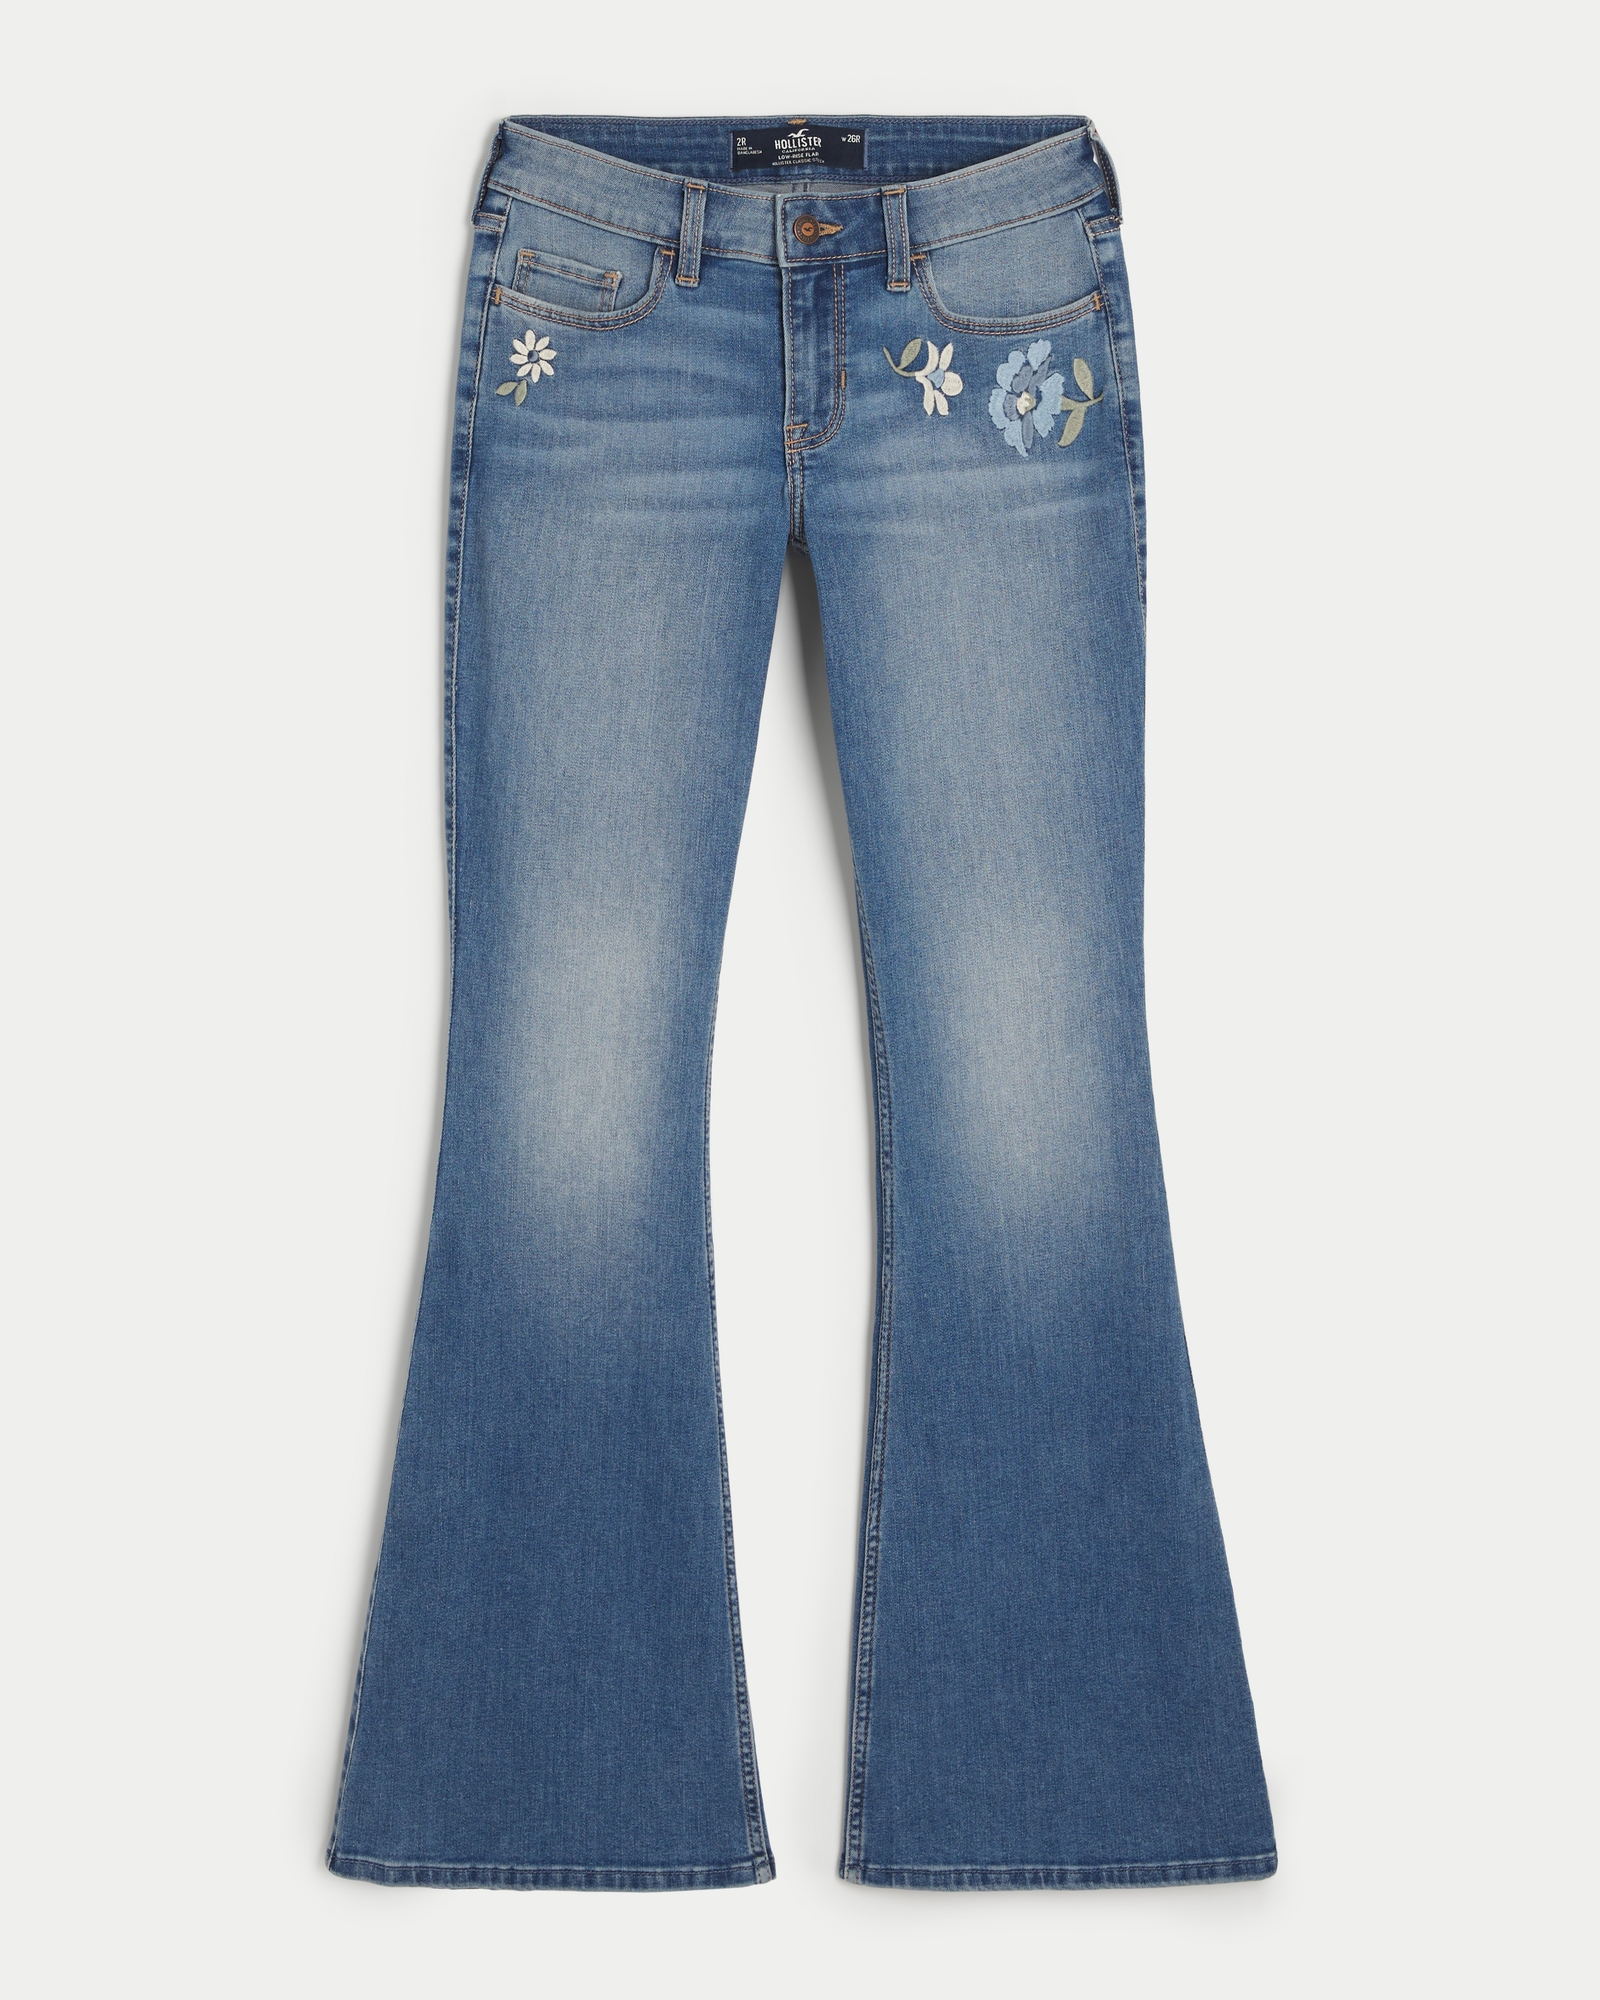 https://img.hollisterco.com/is/image/anf/KIC_355-4029-0036-278_prod1.jpg?policy=product-extra-large